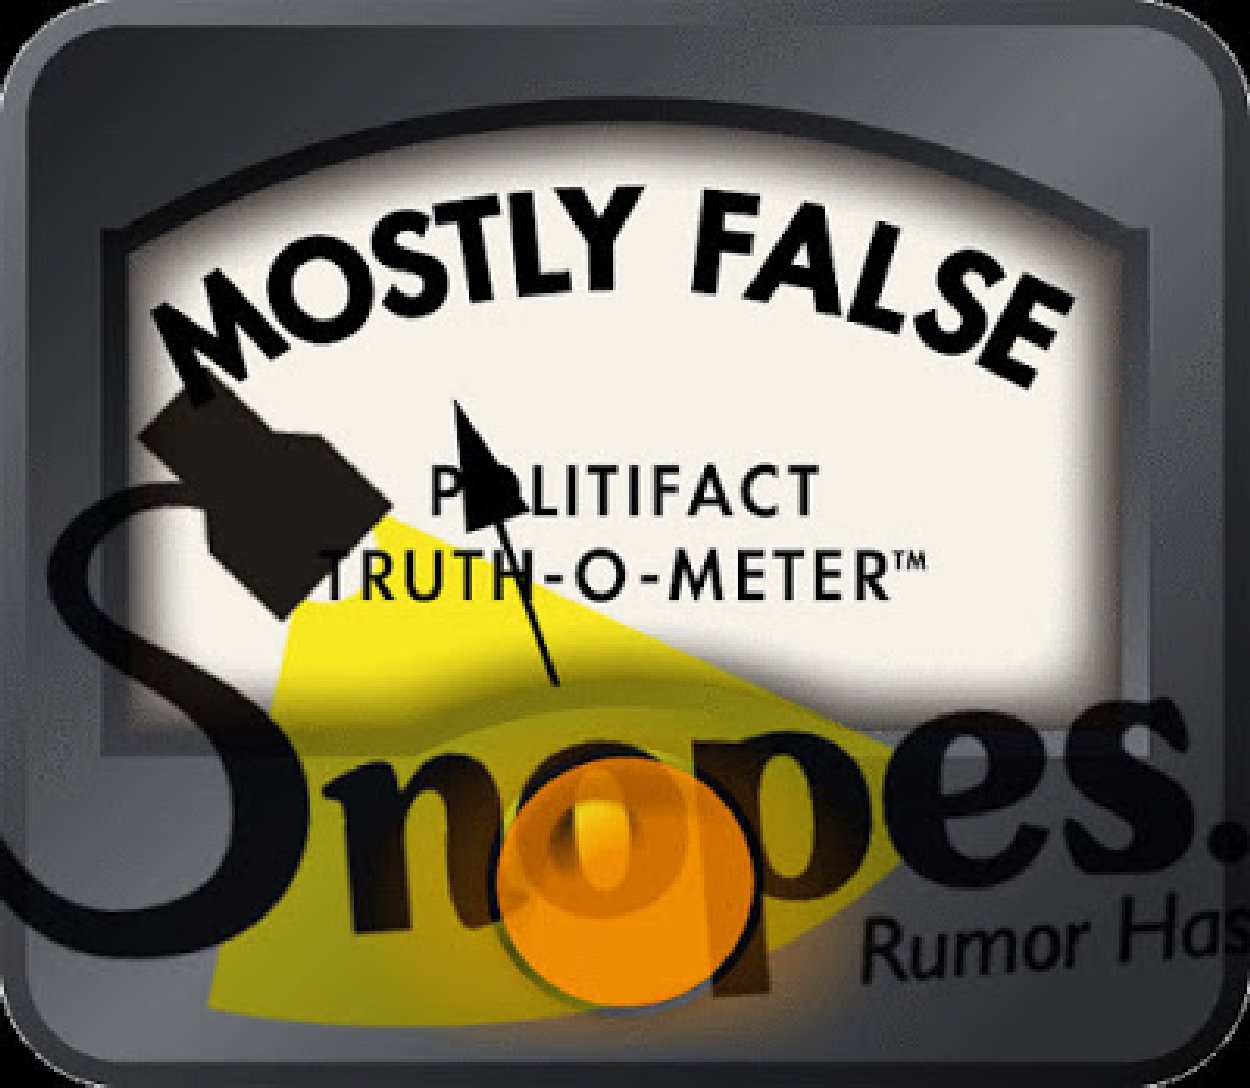 SNOPES TAKEN HOSTAGE: Left-wing “fact-checker” reveals it has lost control of its website